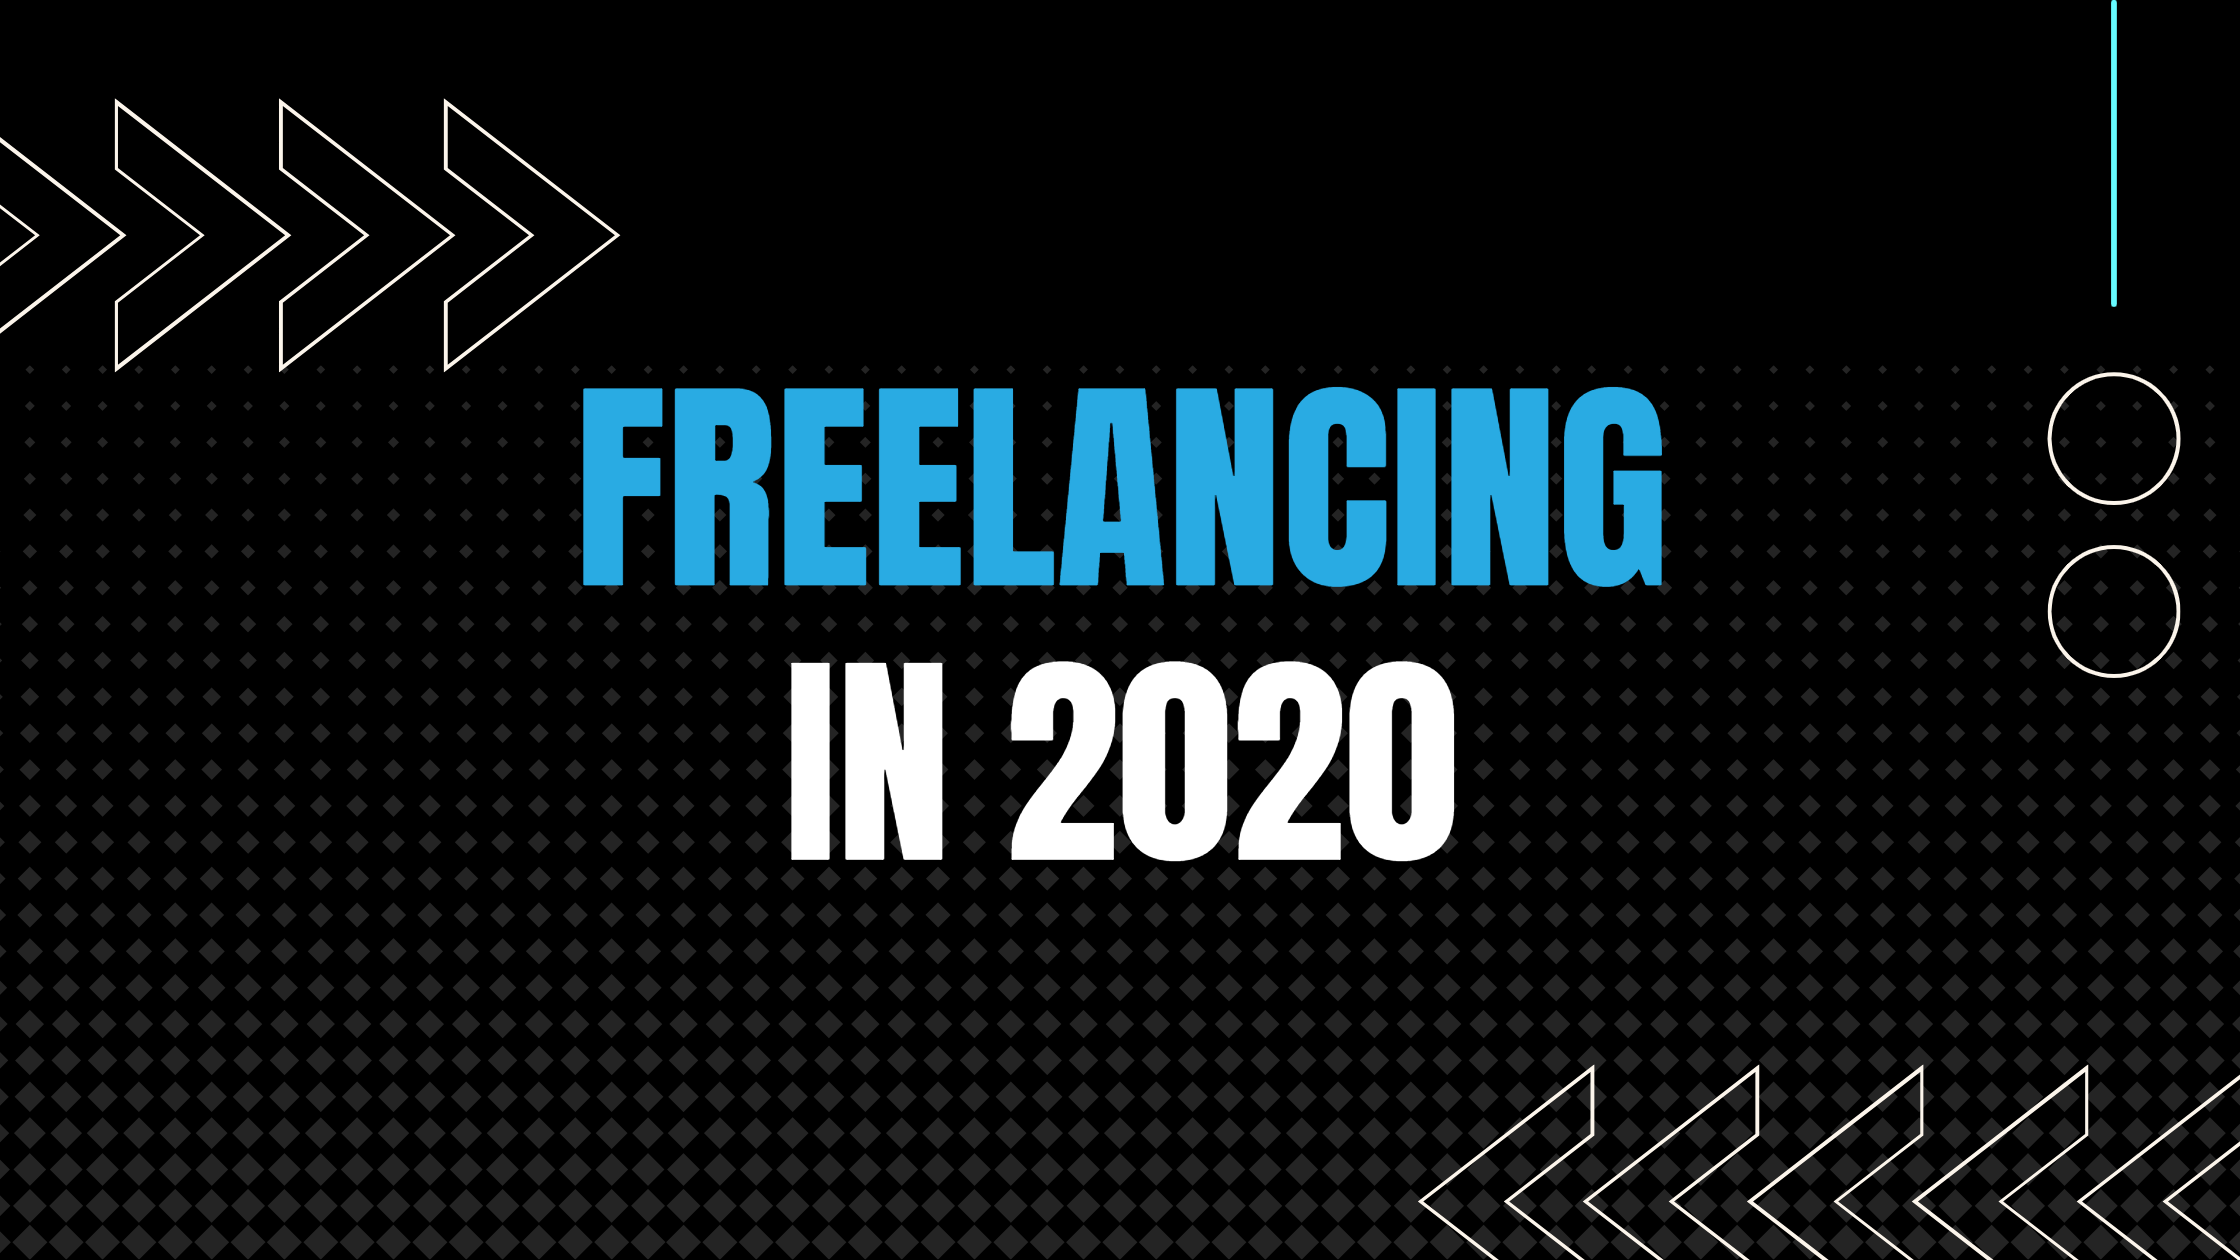 What freelancing in 2020 might look like